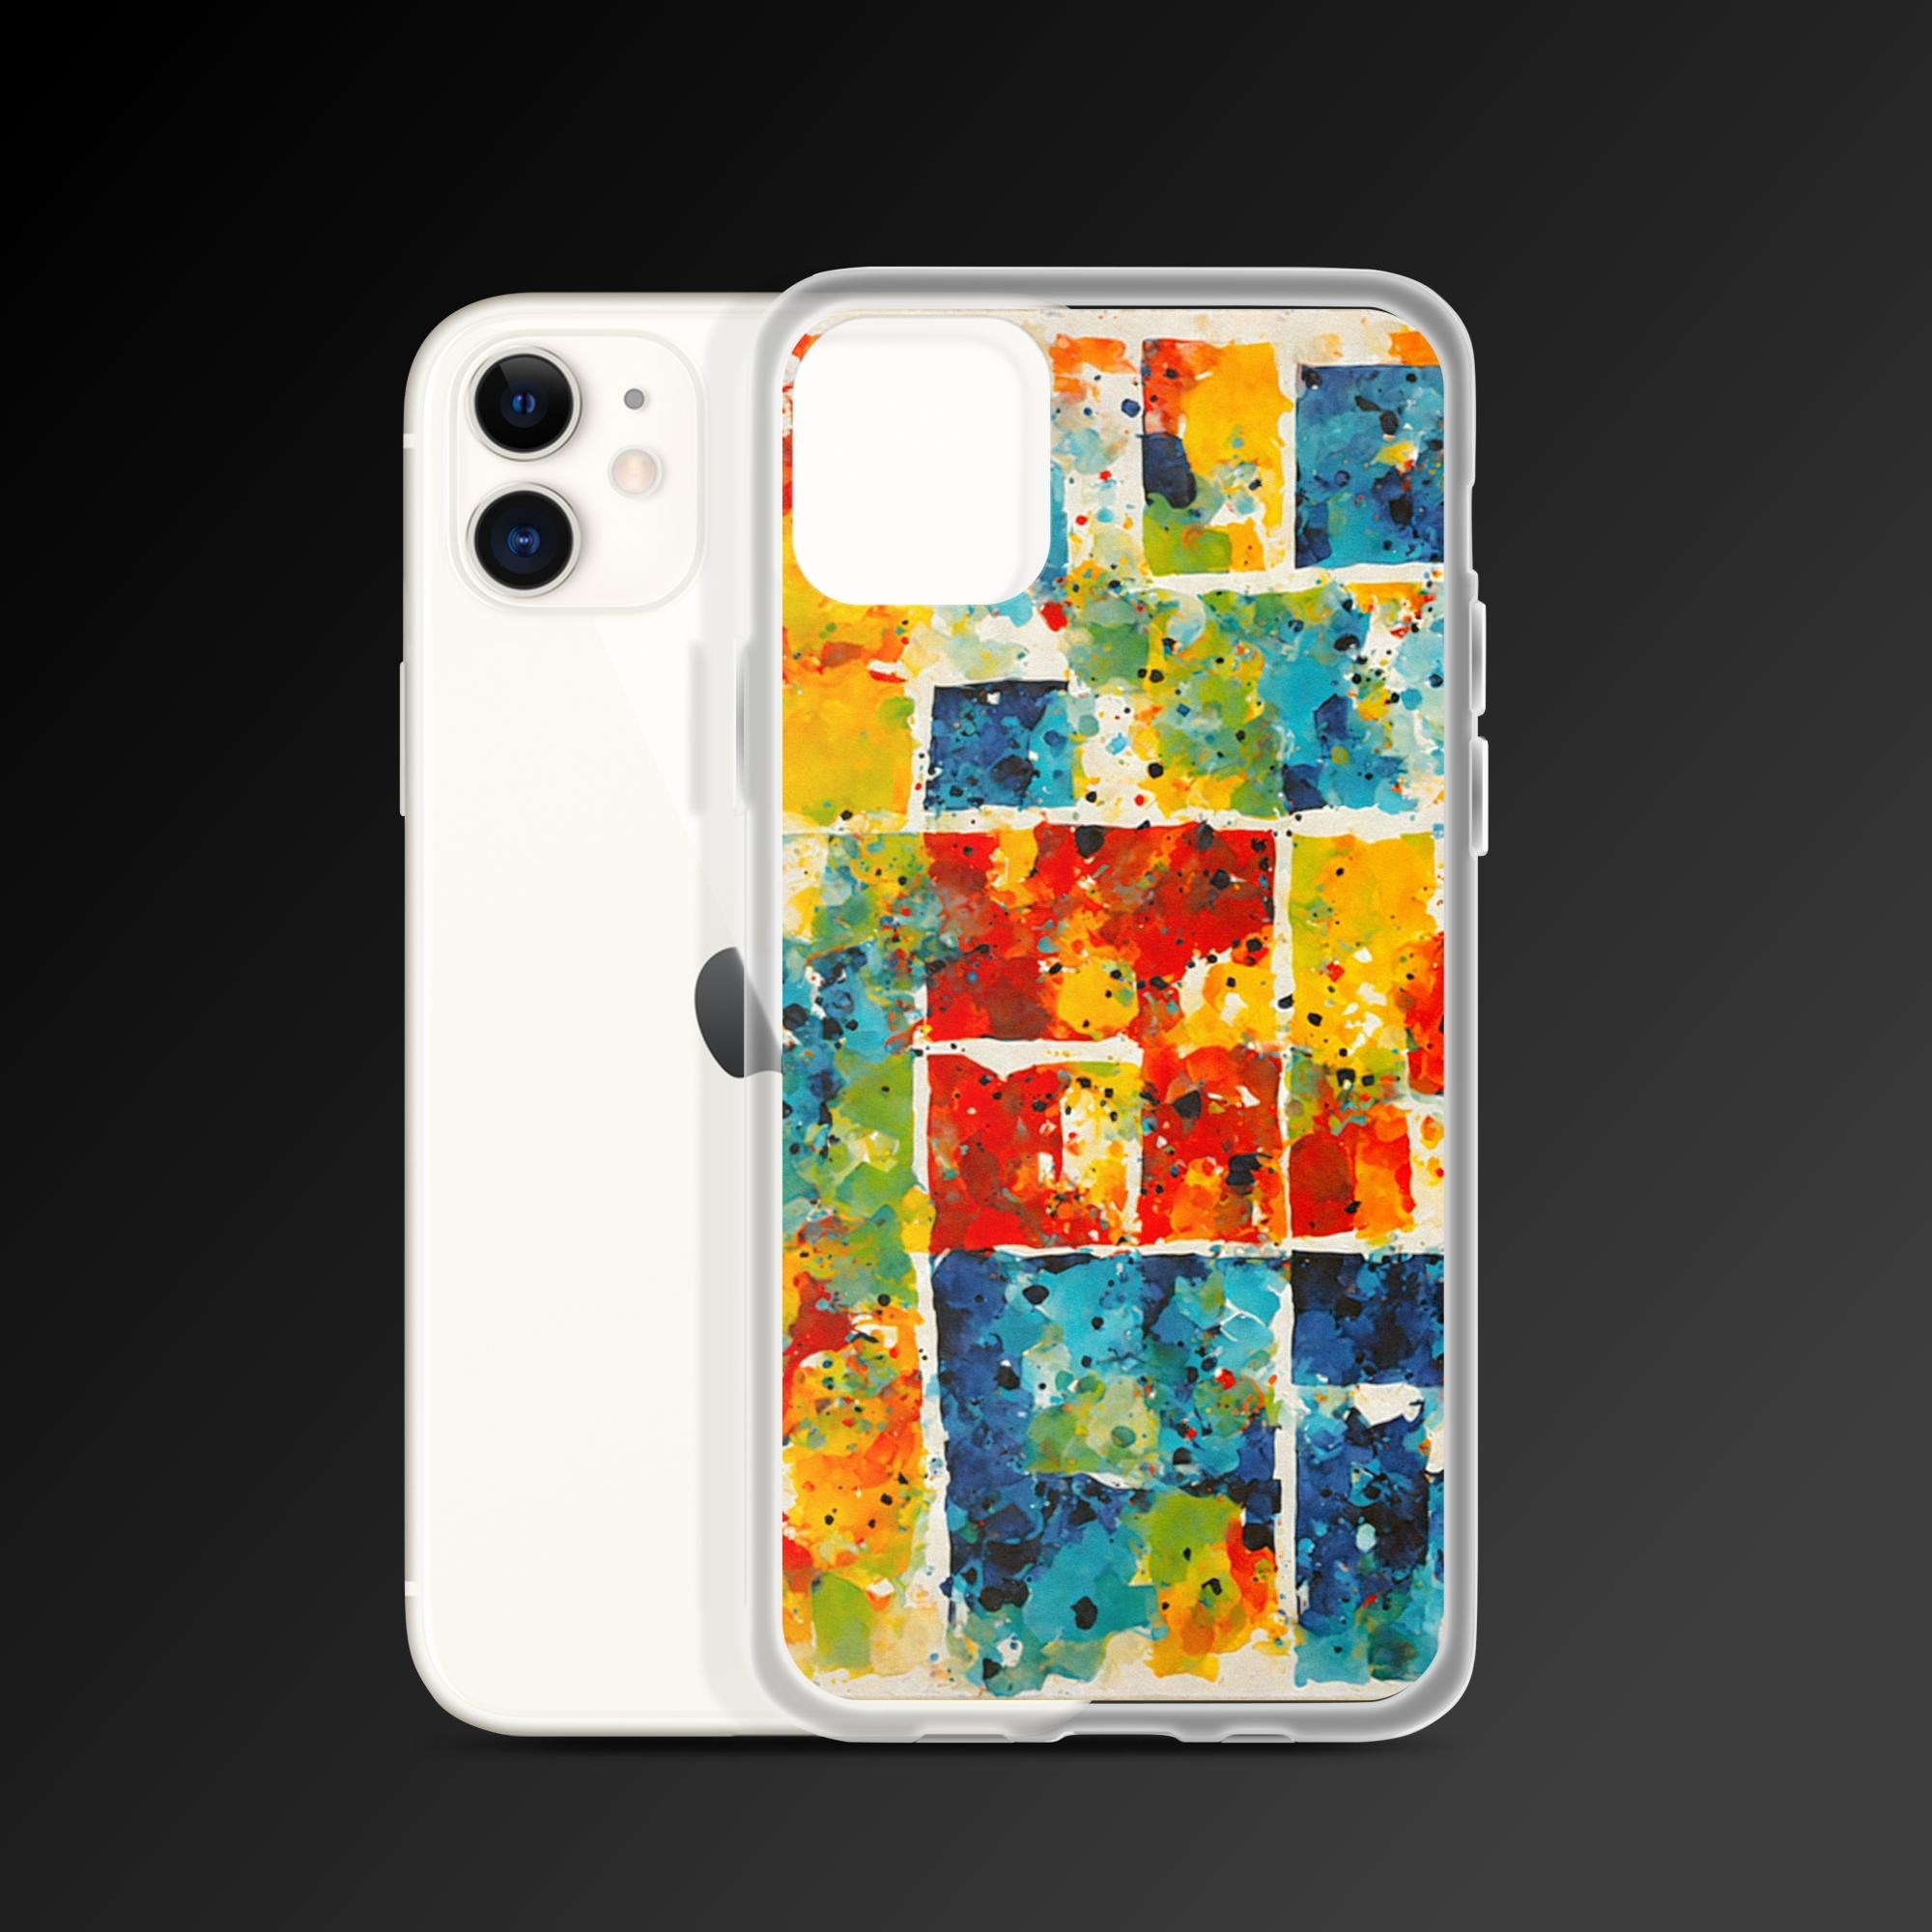 "Sentimental balance" clear iphone case - Clear iphone case - Ever colorful